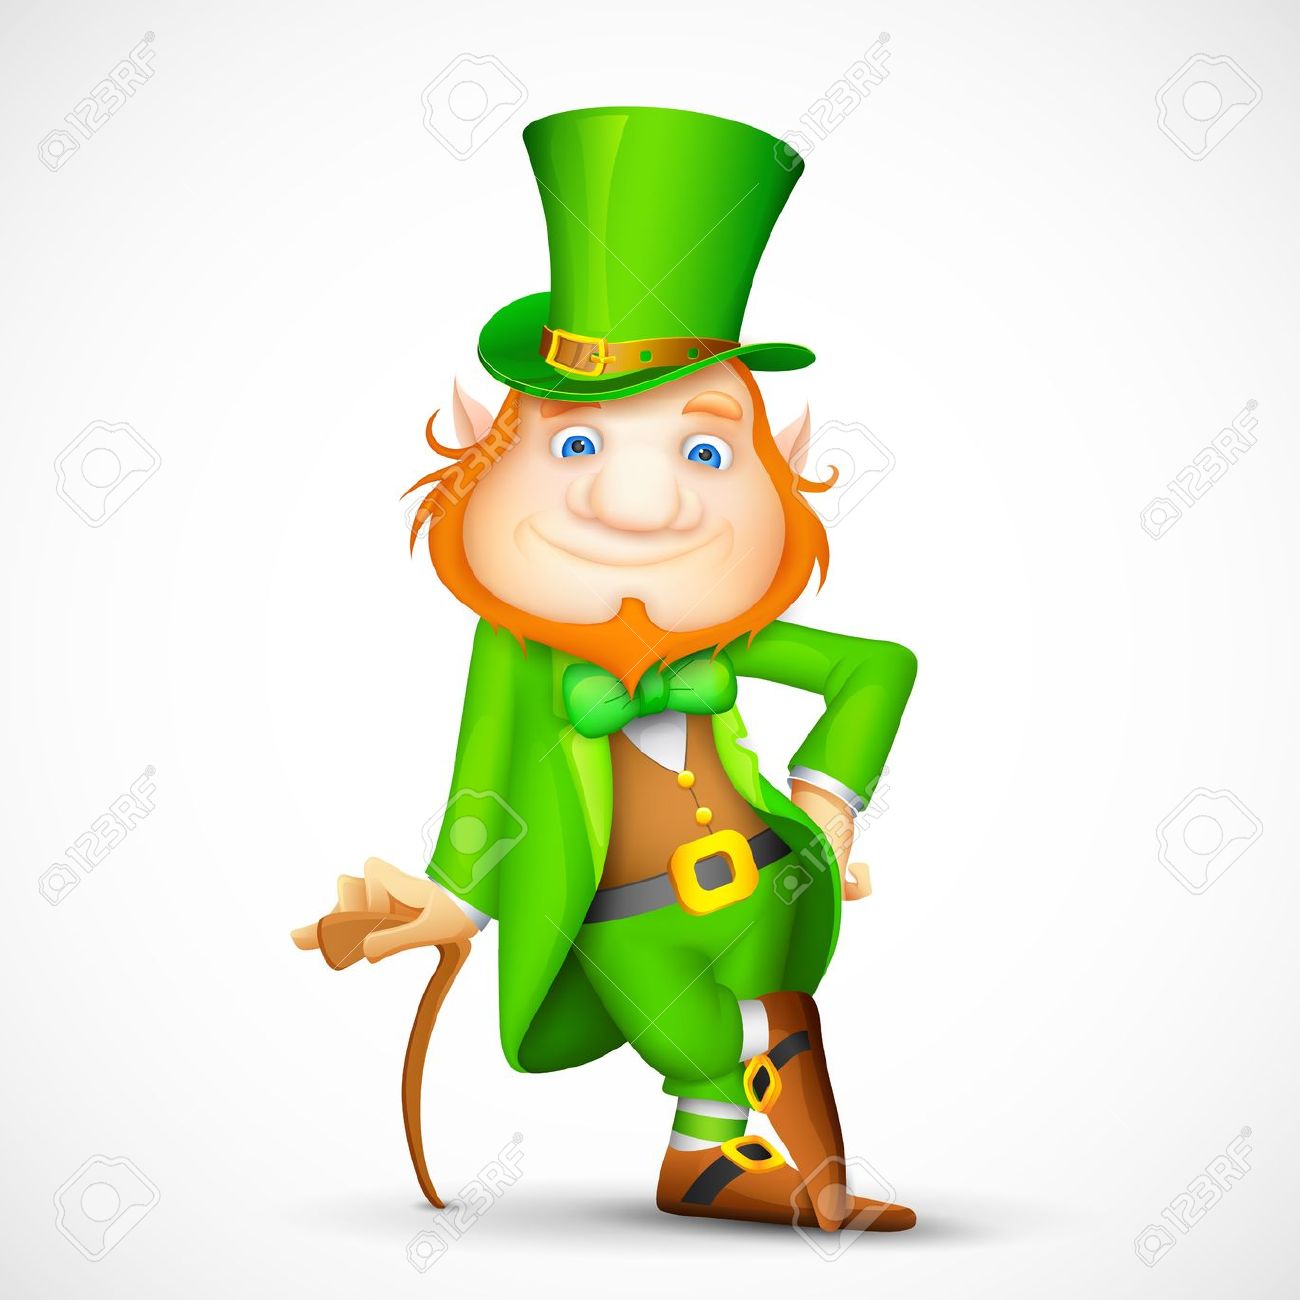 Illustration of leprechaun with walking stick for saint patrick s day stock photo picture and royalty free image image